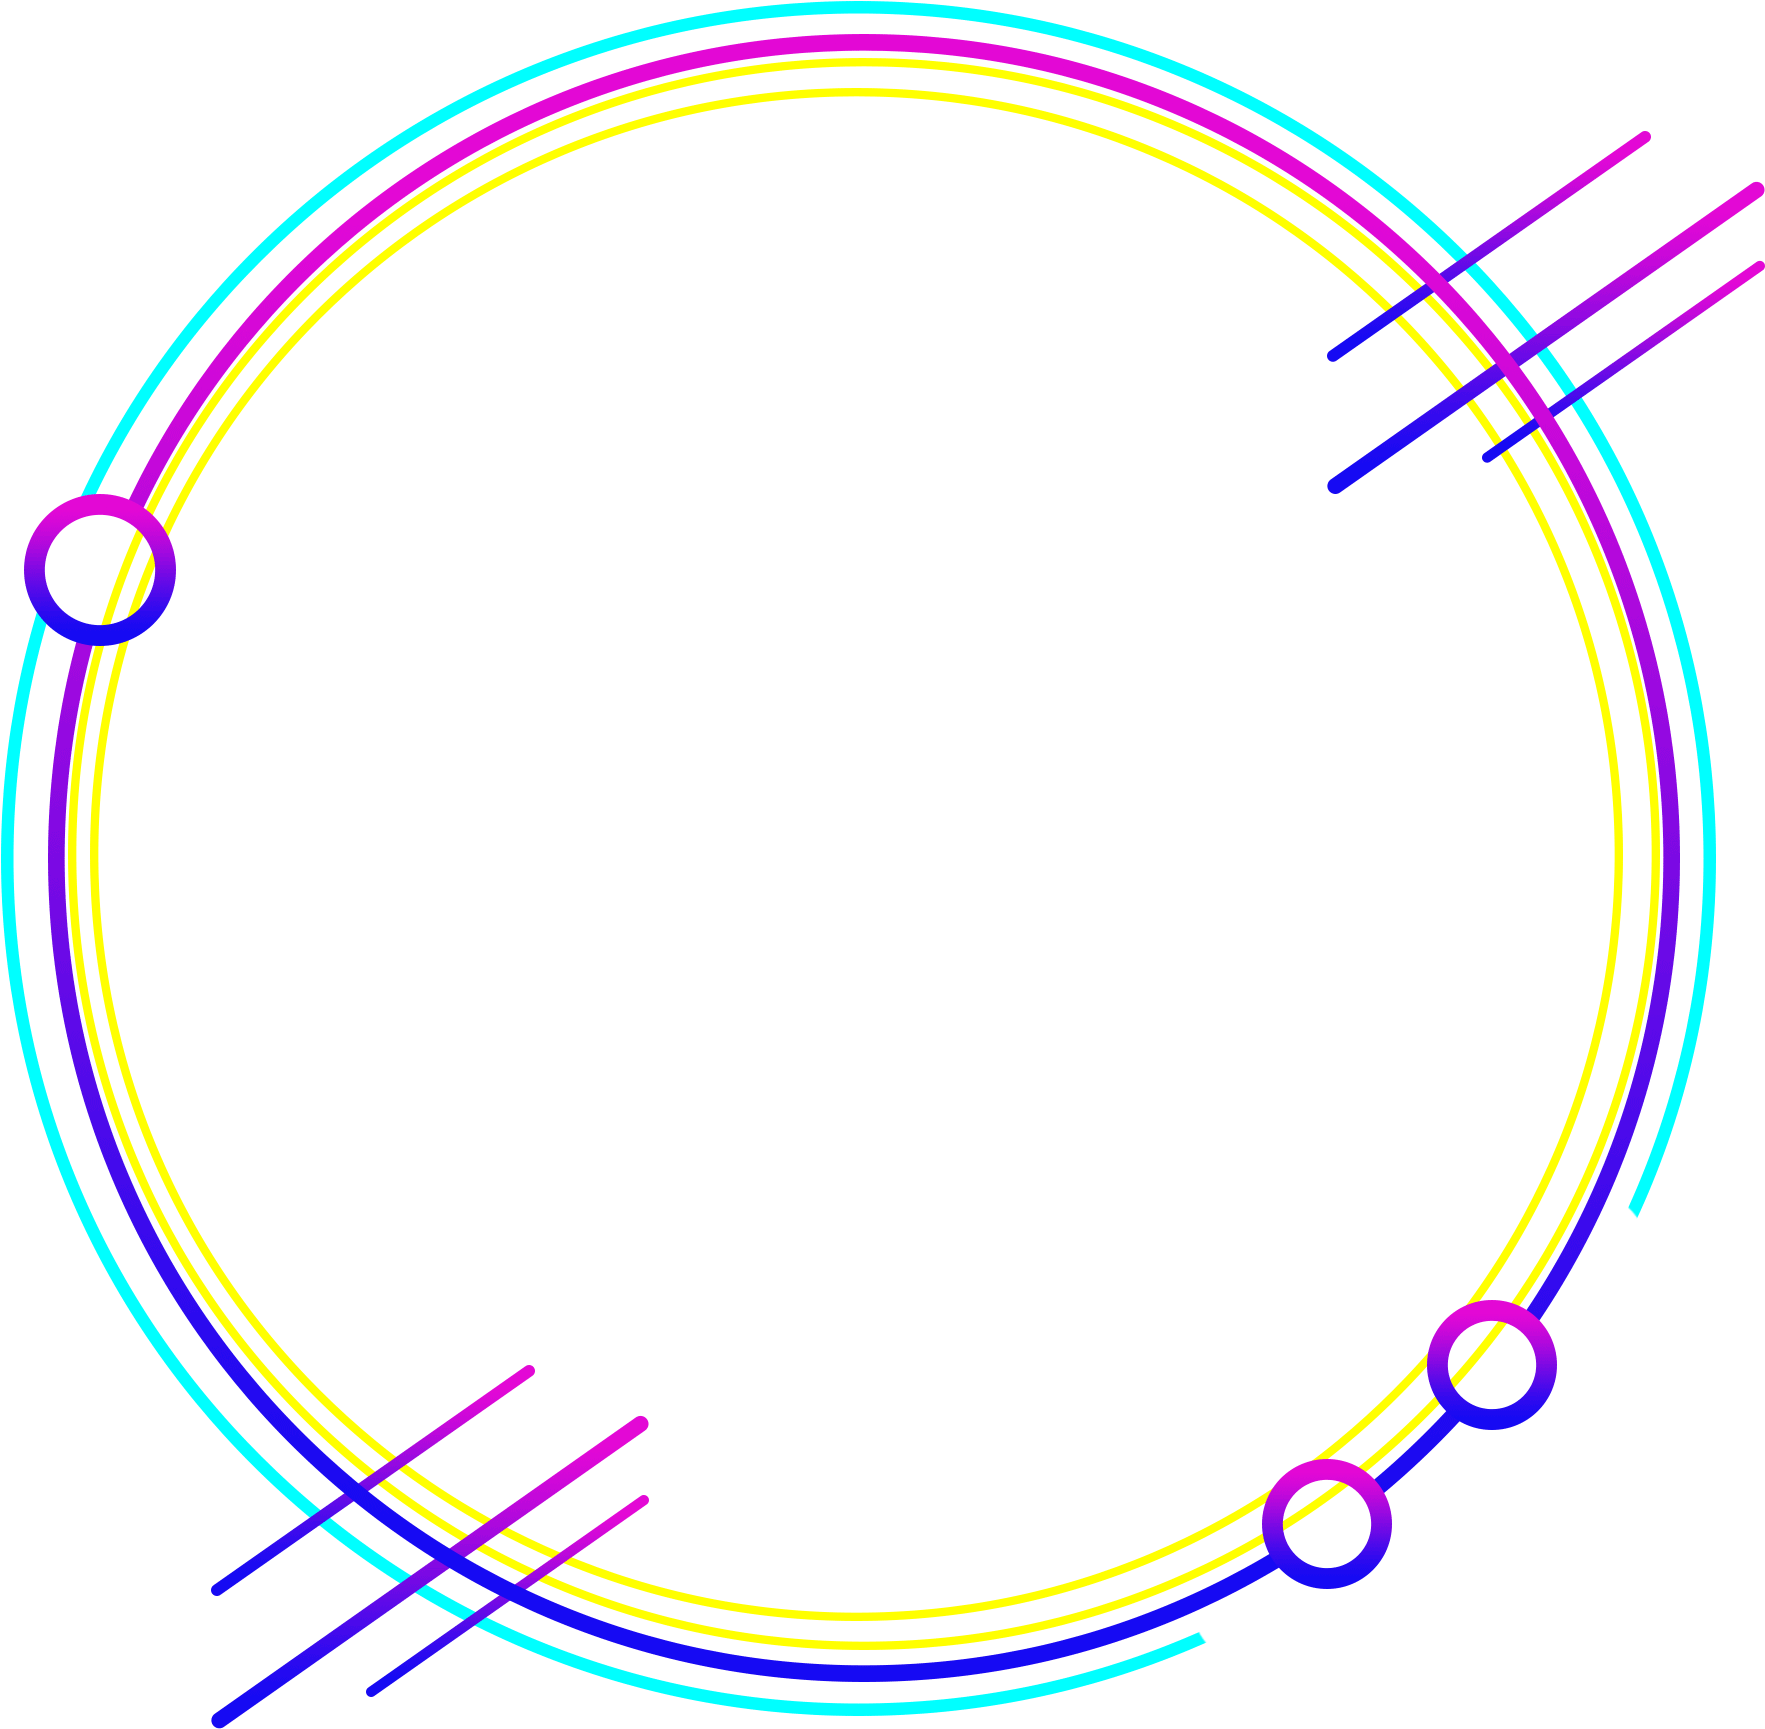 A Colorful Circle With Lines And Dots